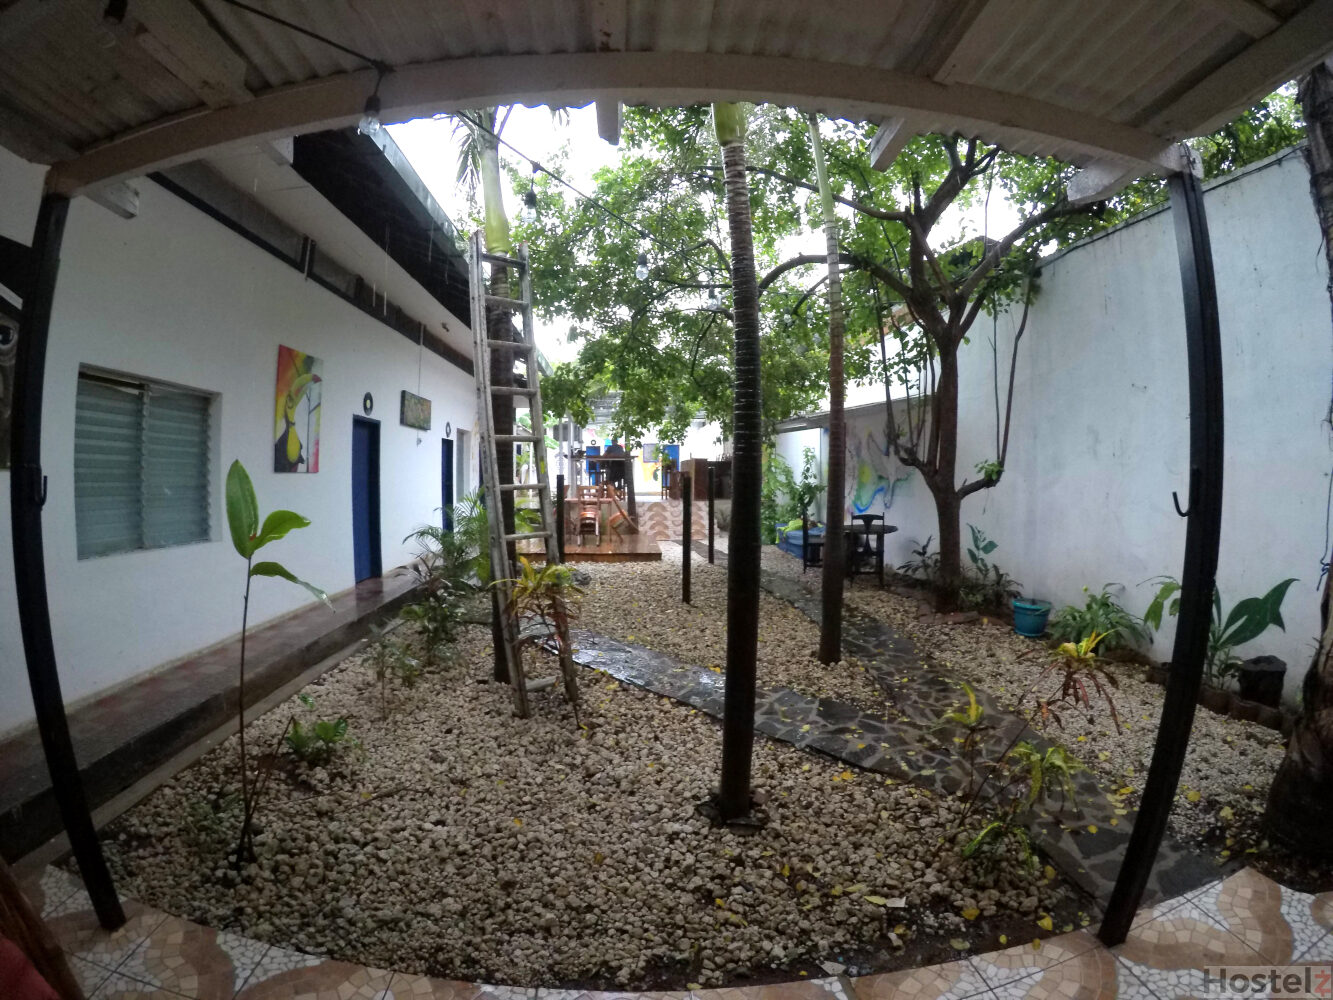 View of the courtyard towards bar, pool, and kitchen